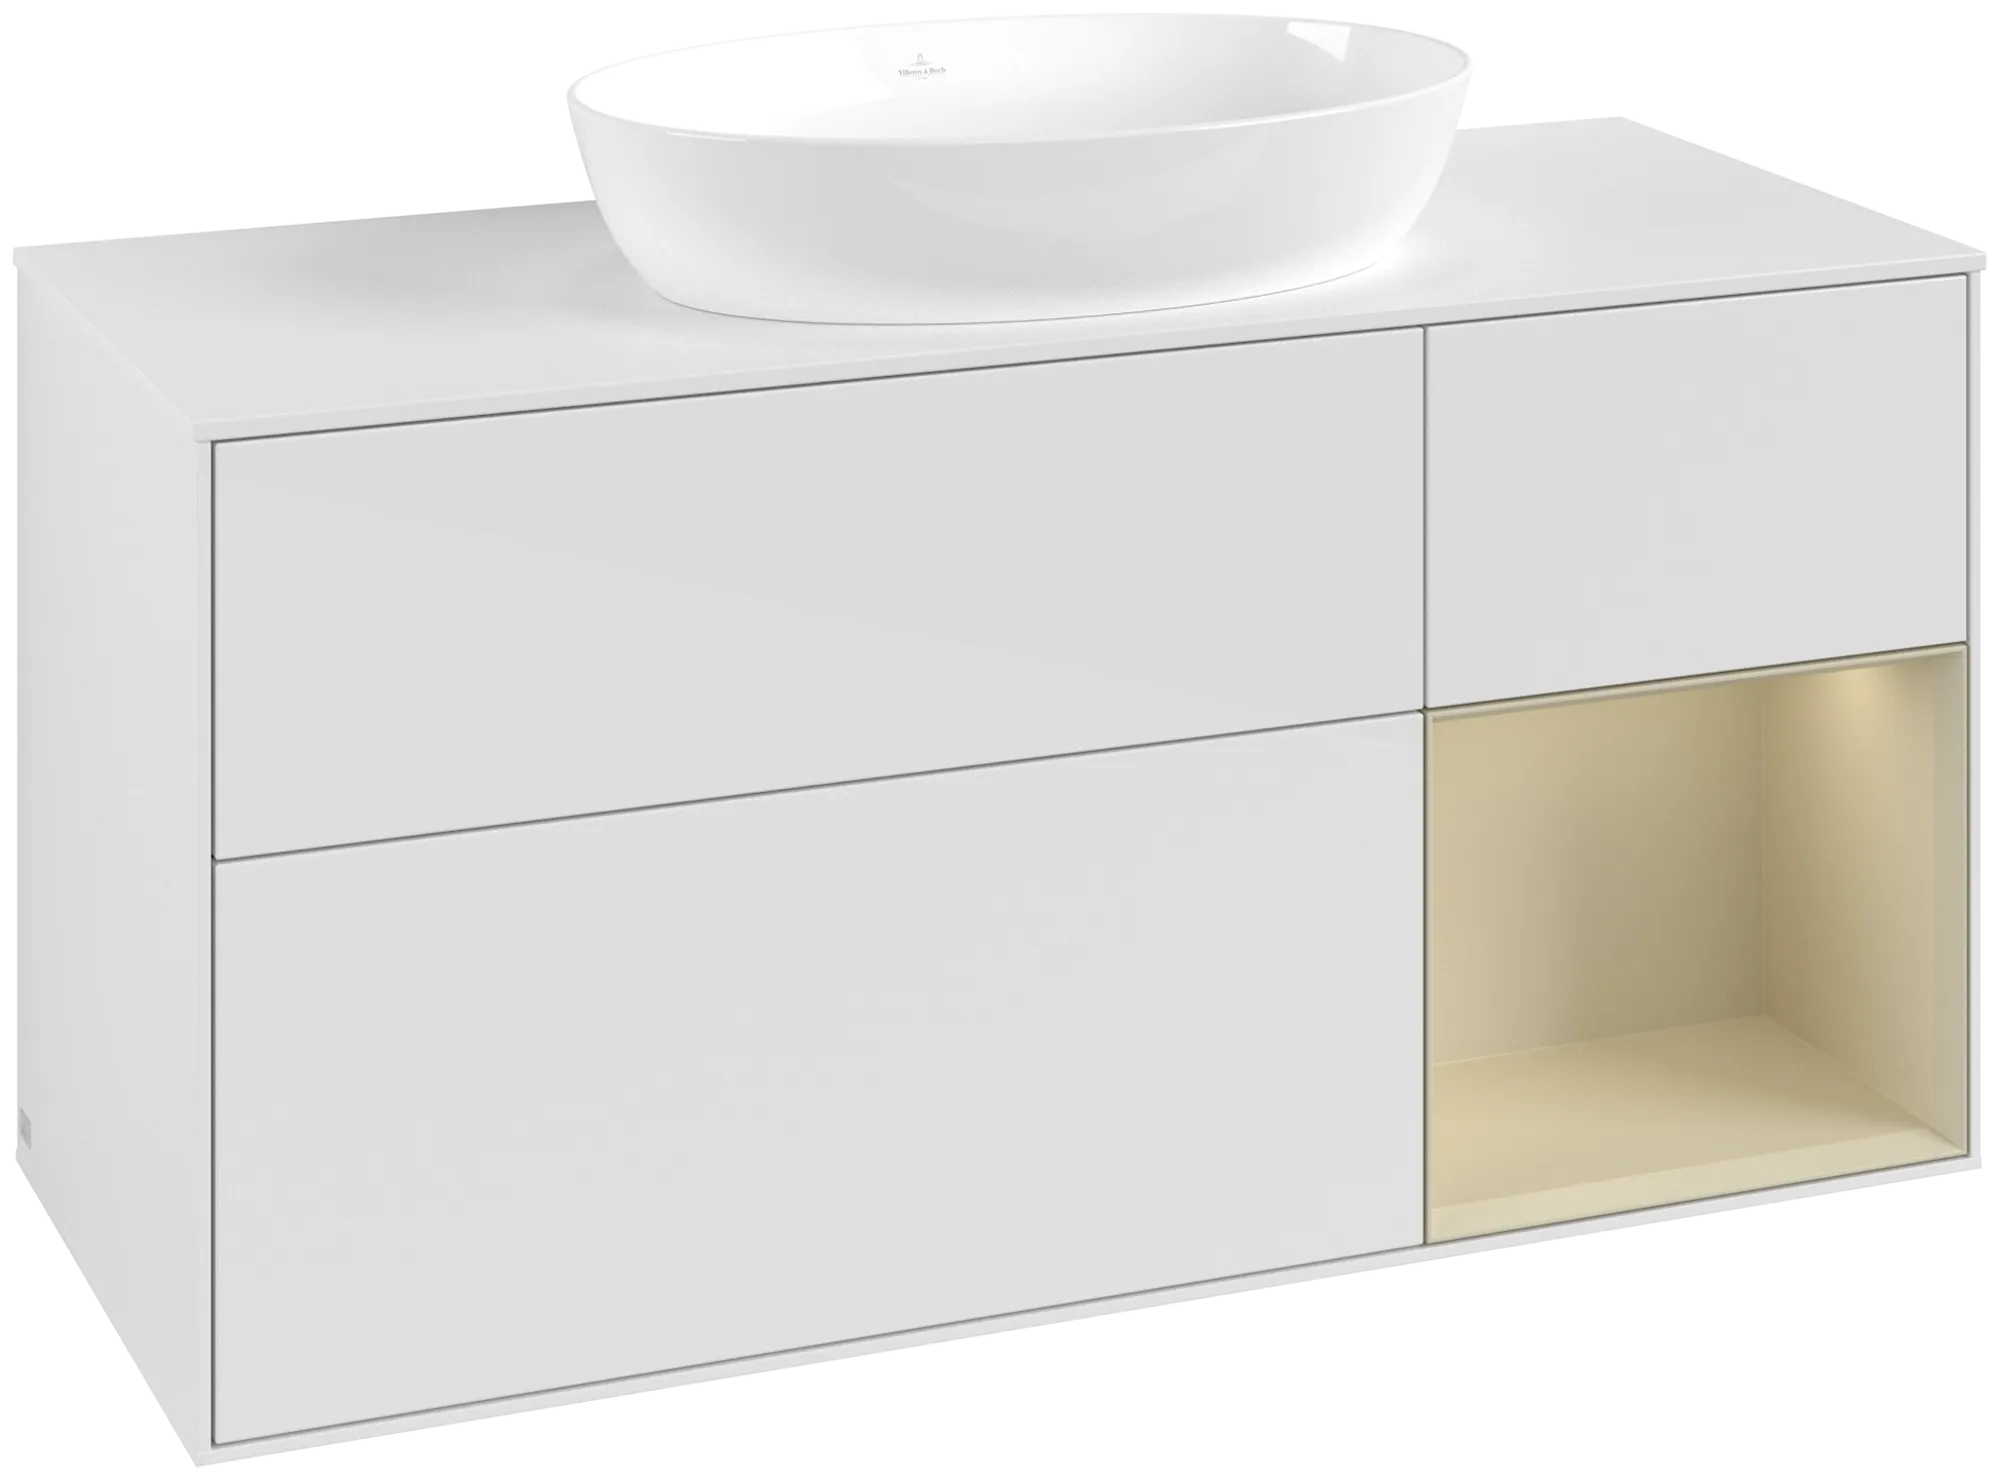 Obrázek VILLEROY BOCH Finion Vanity unit, with lighting, 3 pull-out compartments, 1200 x 603 x 501 mm, Glossy White Lacquer / Silk Grey Matt Lacquer / Glass White Matt #GA71HJGF